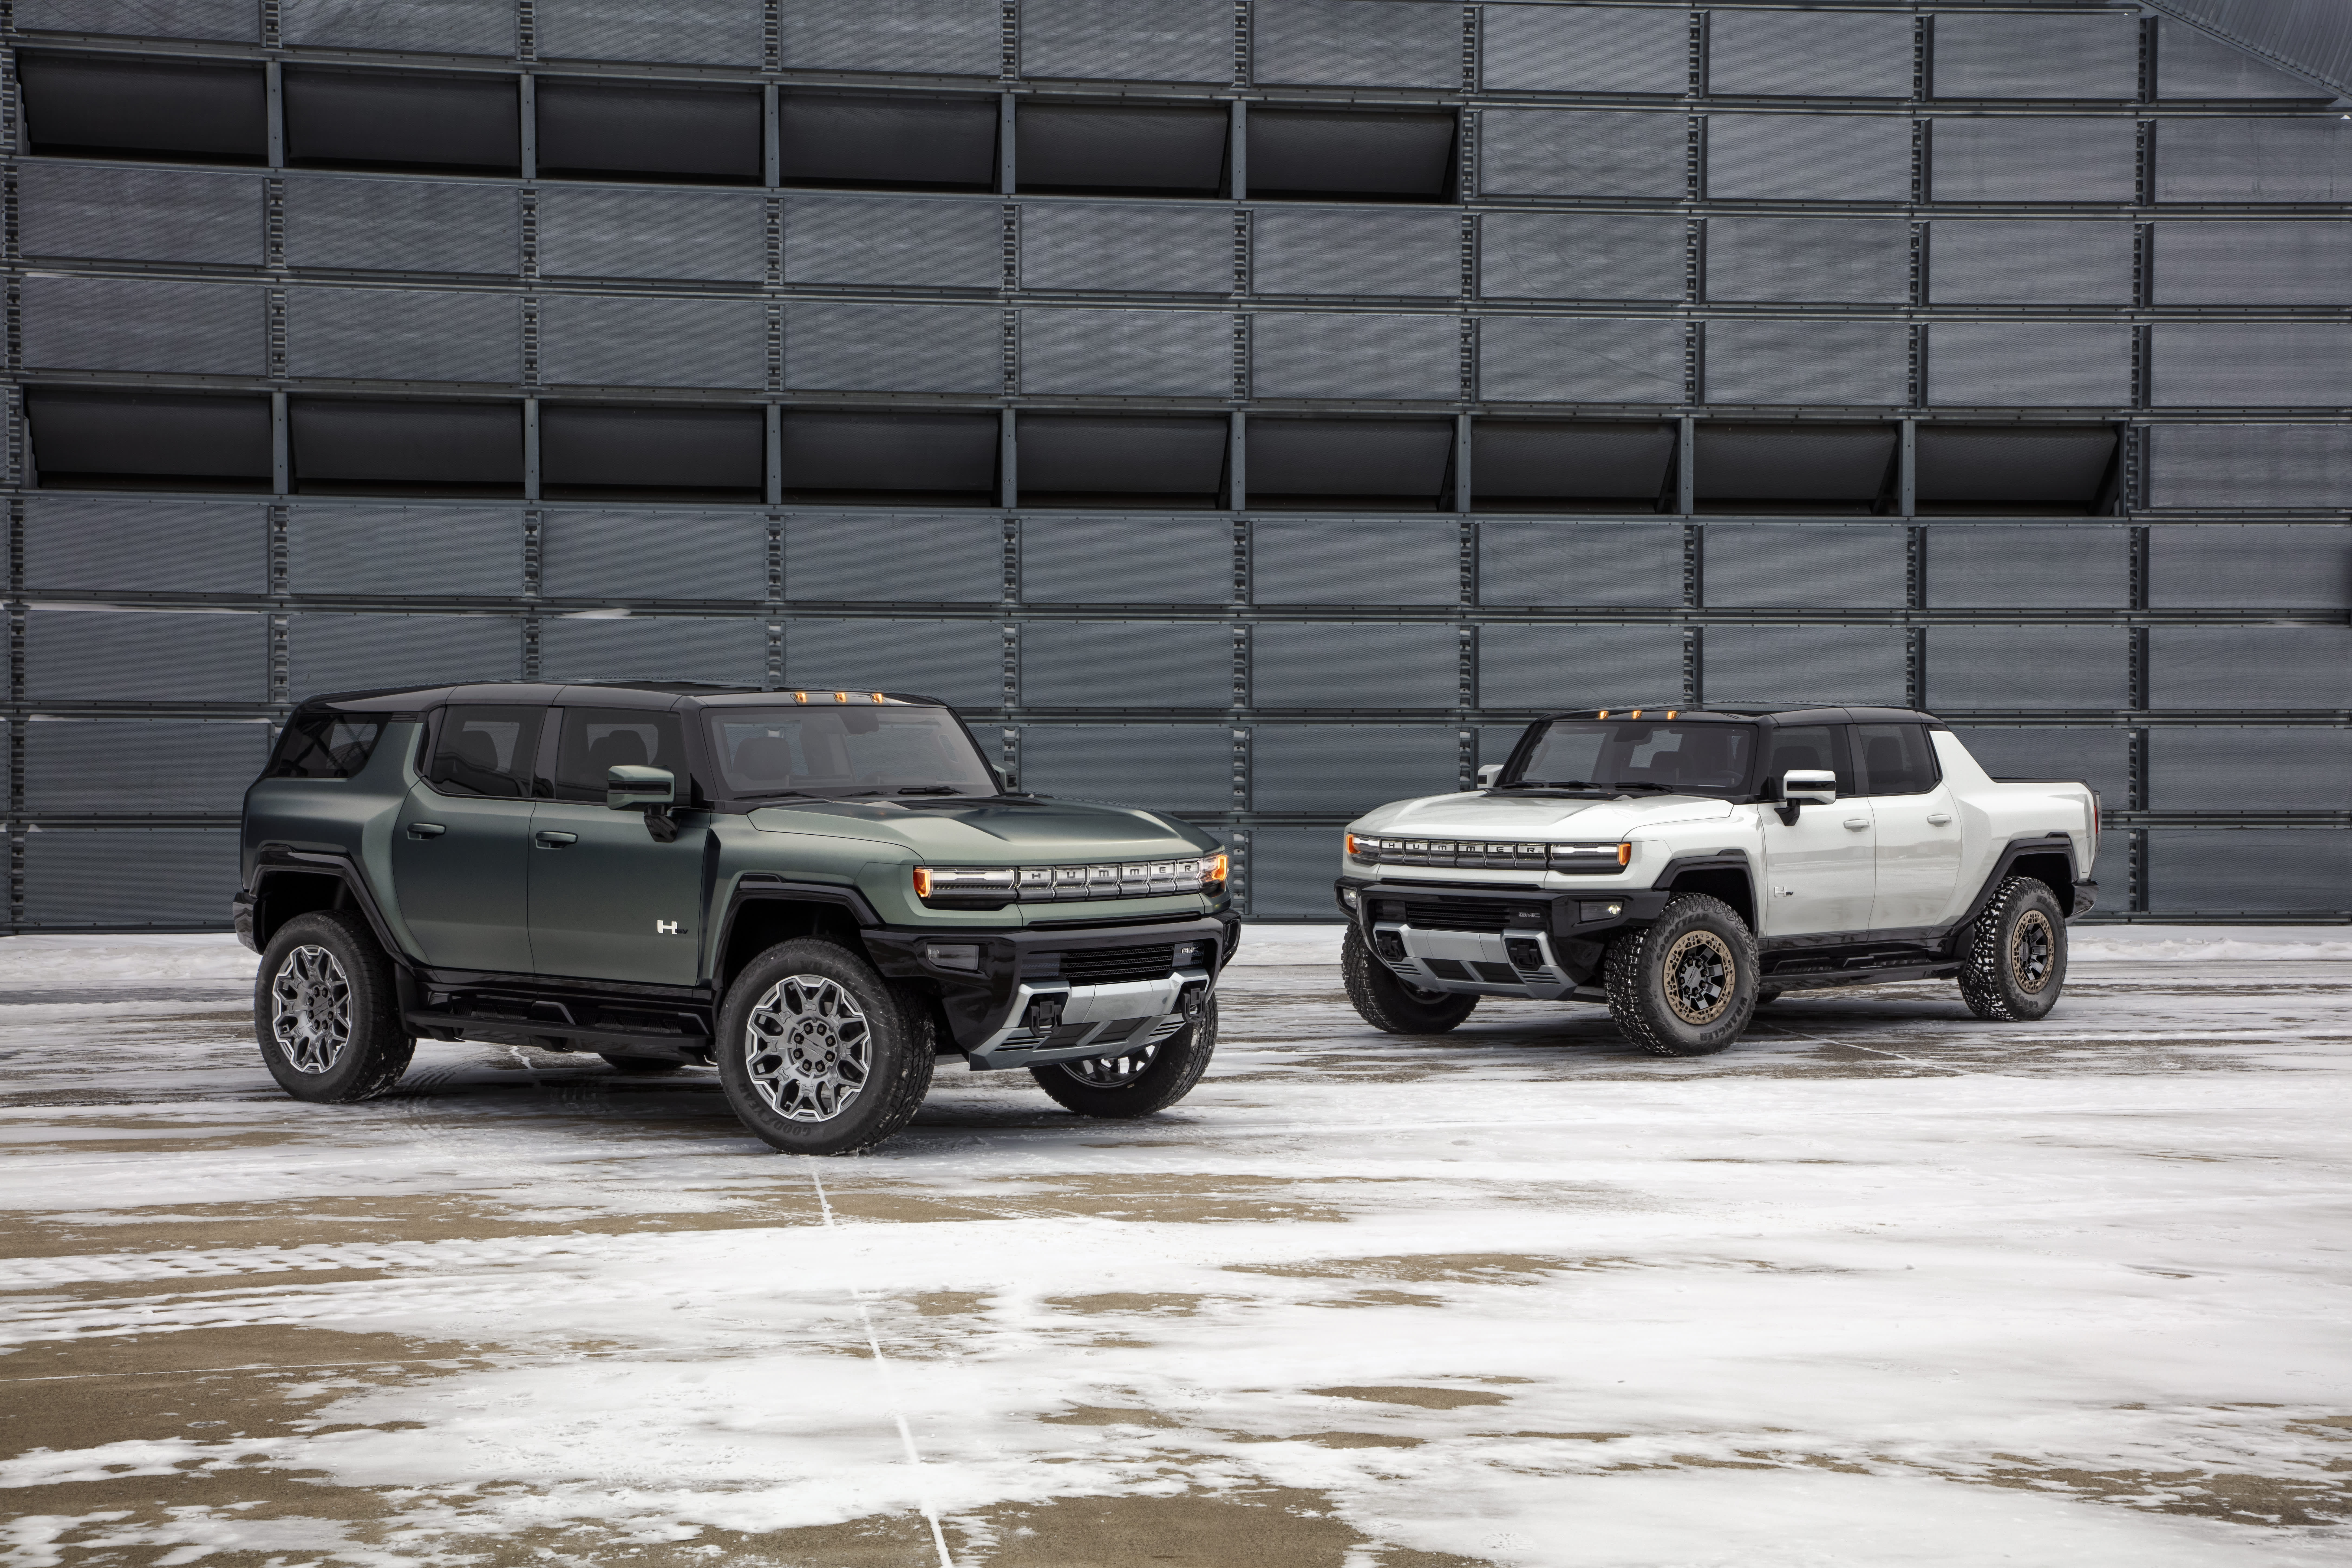 GM launches Hummer electric SUV topping $ 110,000